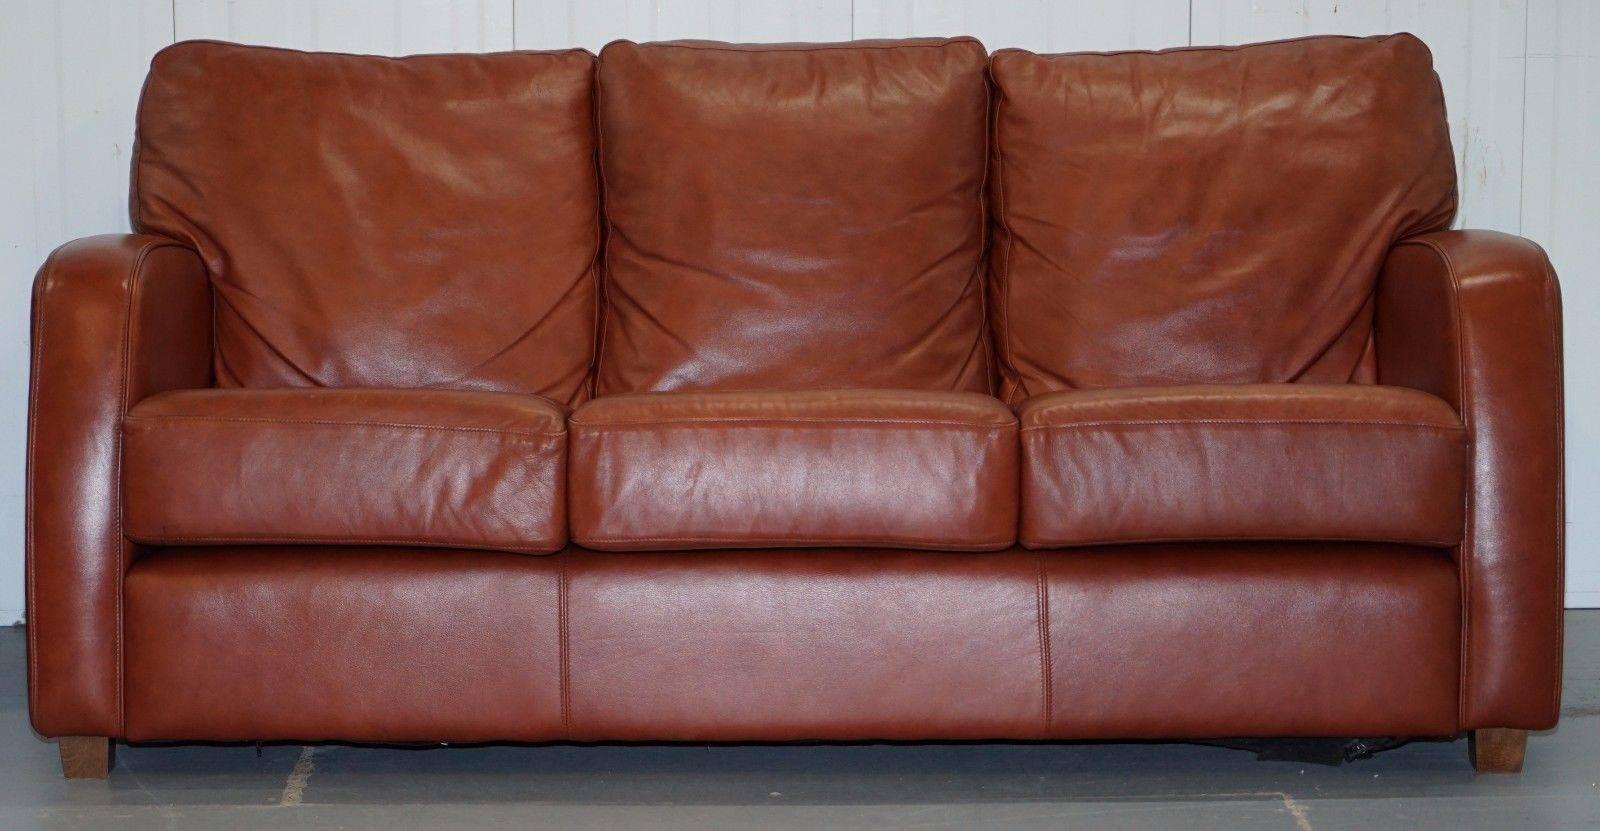 We are delighted to offer for auction this lovely saddle brown leather three-seat sofa

A lovely looking and very comfortable sofa, the base cushions are medium firm the back is medium soft, the IDEA being you don’t sink down you sink a little